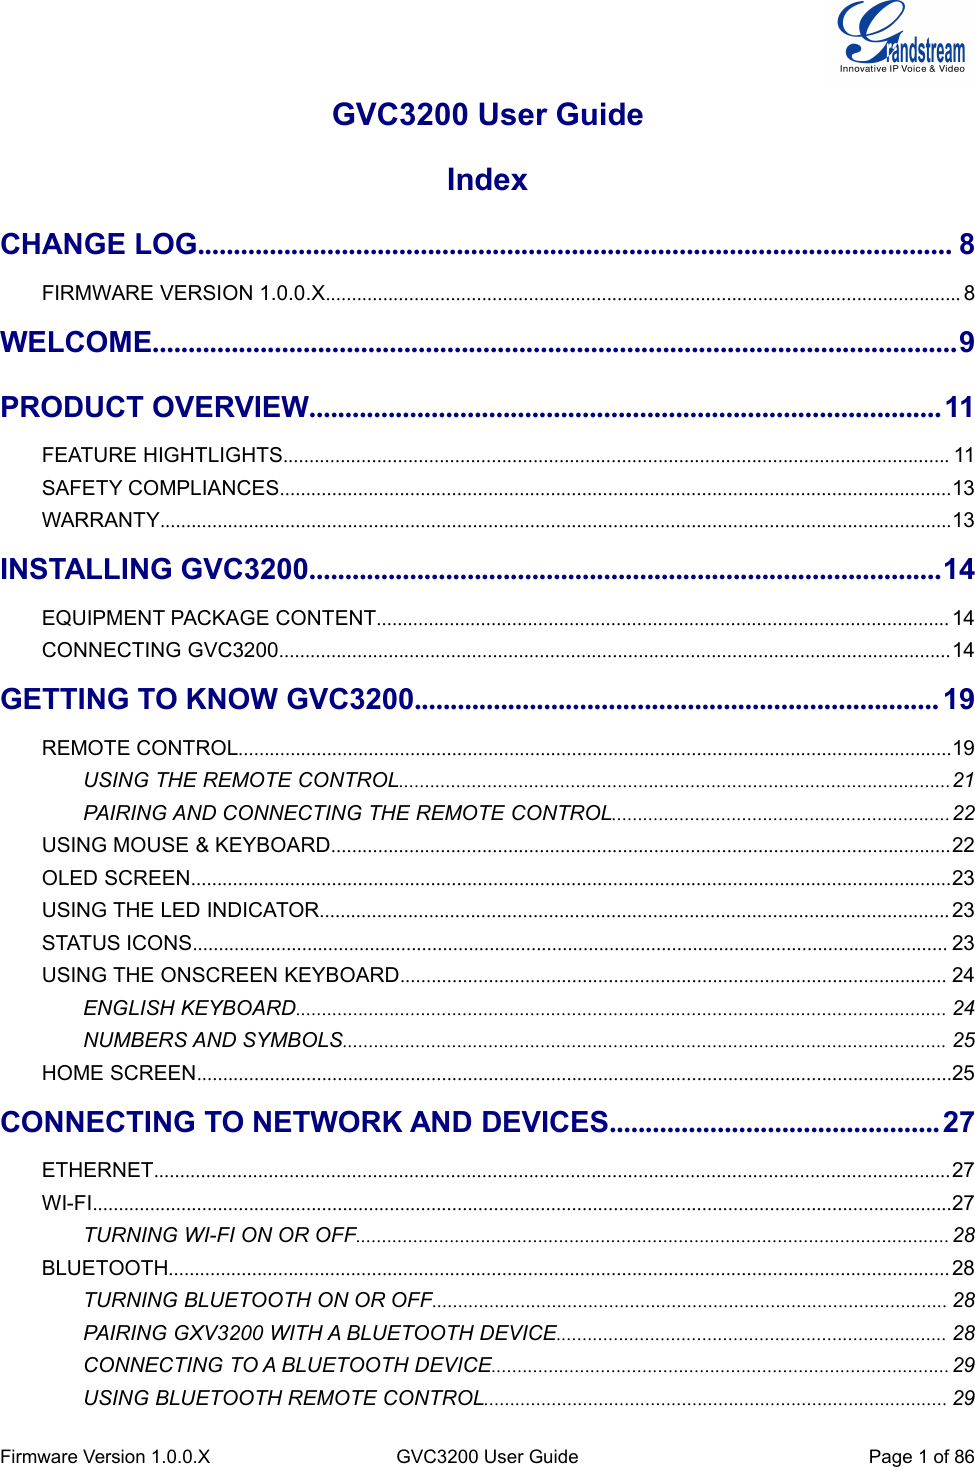 Firmware Version 1.0.0.XGVC3200 User GuidePage 1of 86GVC3200 User GuideIndexCHANGE LOG......................................................................................................... 8FIRMWARE VERSION 1.0.0.X.......................................................................................................................... 8WELCOME................................................................................................................9PRODUCT OVERVIEW........................................................................................11FEATURE HIGHTLIGHTS................................................................................................................................ 11SAFETY COMPLIANCES.................................................................................................................................13WARRANTY........................................................................................................................................................13INSTALLING GVC3200........................................................................................14EQUIPMENT PACKAGE CONTENT.............................................................................................................. 14CONNECTING GVC3200.................................................................................................................................14GETTING TO KNOW GVC3200......................................................................... 19REMOTE CONTROL.........................................................................................................................................19USING THE REMOTE CONTROL..........................................................................................................21PAIRING AND CONNECTING THE REMOTE CONTROL.................................................................22USING MOUSE &amp; KEYBOARD.......................................................................................................................22OLED SCREEN..................................................................................................................................................23USING THE LED INDICATOR......................................................................................................................... 23STATUS ICONS................................................................................................................................................. 23USING THE ONSCREEN KEYBOARD......................................................................................................... 24ENGLISH KEYBOARD............................................................................................................................. 24NUMBERS AND SYMBOLS.................................................................................................................... 25HOME SCREEN.................................................................................................................................................25CONNECTING TO NETWORK AND DEVICES..............................................27ETHERNET......................................................................................................................................................... 27WI-FI.....................................................................................................................................................................27TURNING WI-FI ON OR OFF.................................................................................................................. 28BLUETOOTH...................................................................................................................................................... 28TURNING BLUETOOTH ON OR OFF................................................................................................... 28PAIRING GXV3200 WITH A BLUETOOTH DEVICE........................................................................... 28CONNECTING TO A BLUETOOTH DEVICE........................................................................................ 29USING BLUETOOTH REMOTE CONTROL......................................................................................... 29